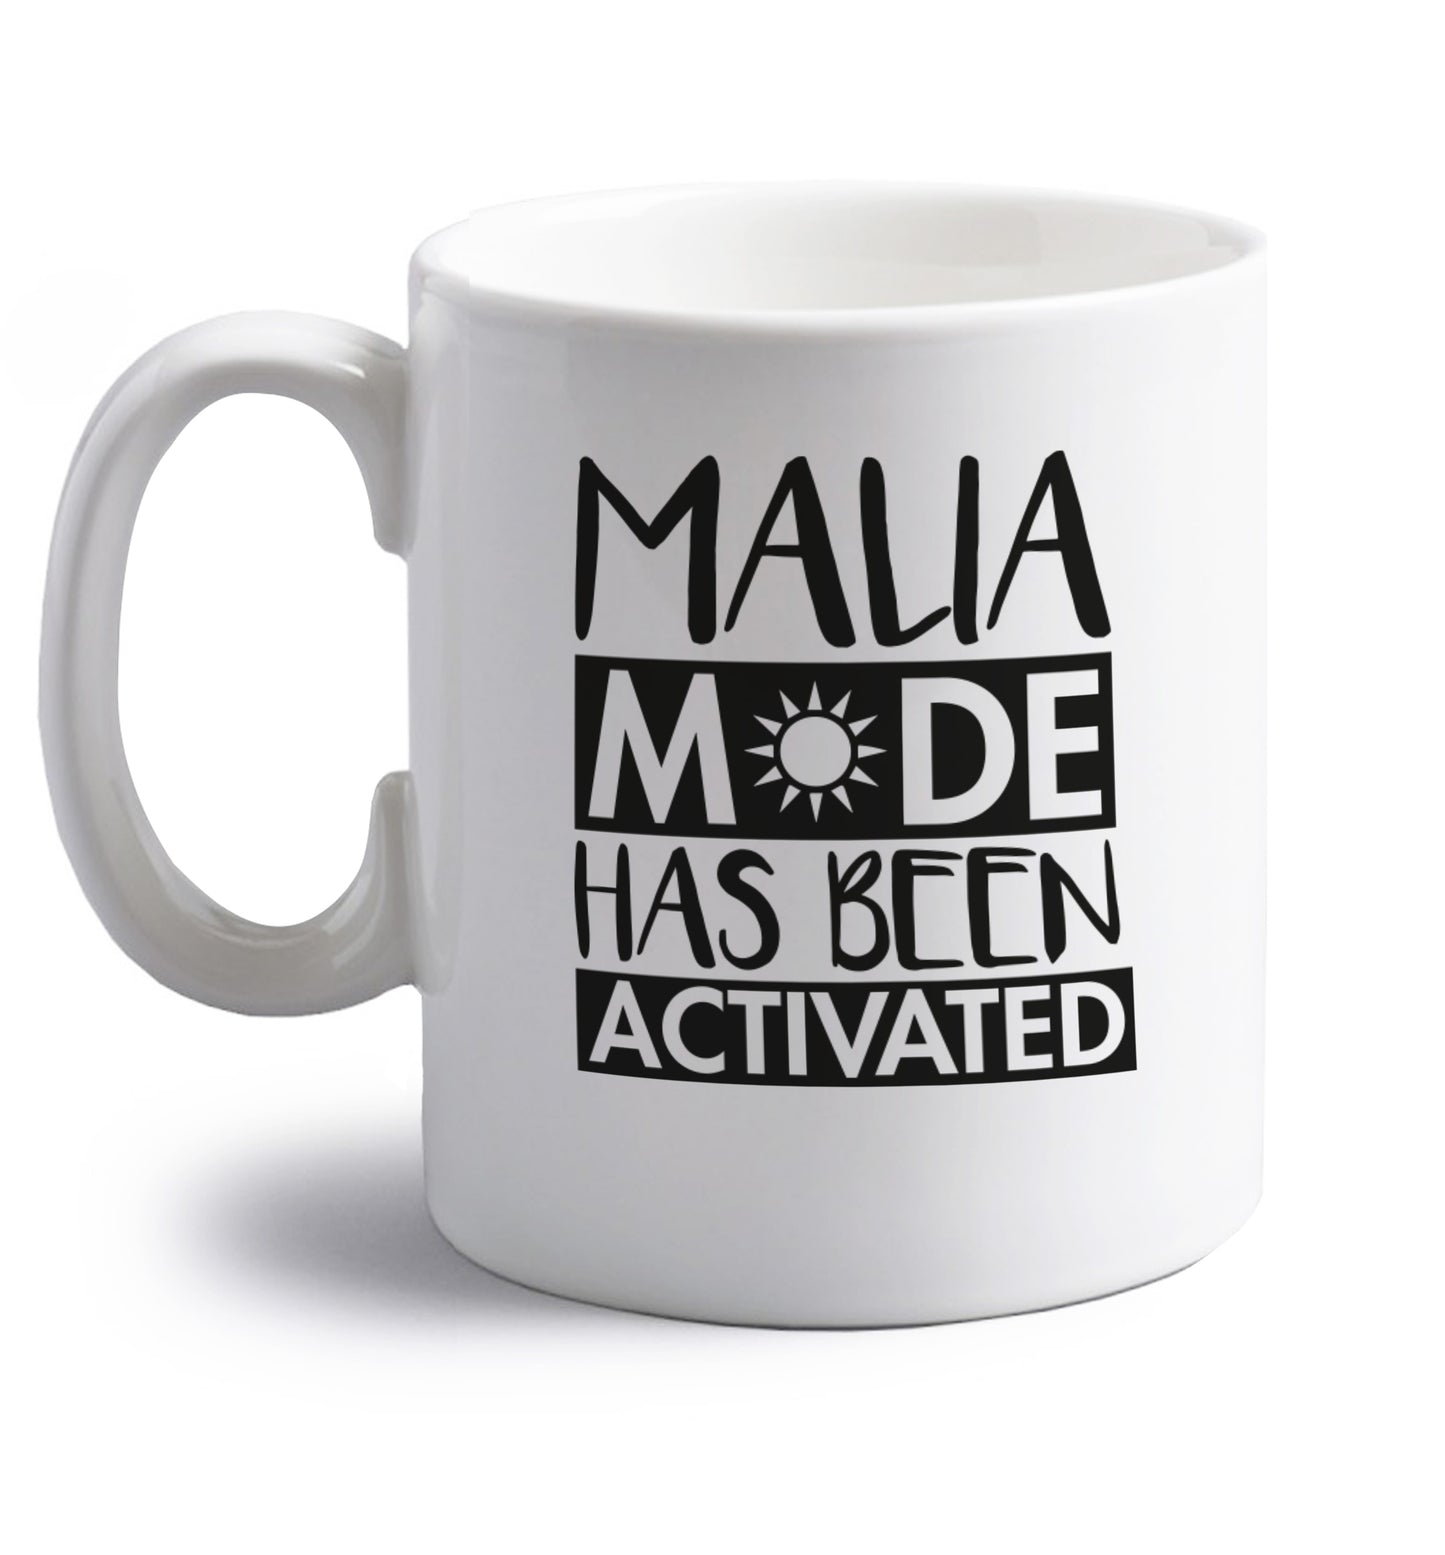 Malia mode has been activated right handed white ceramic mug 